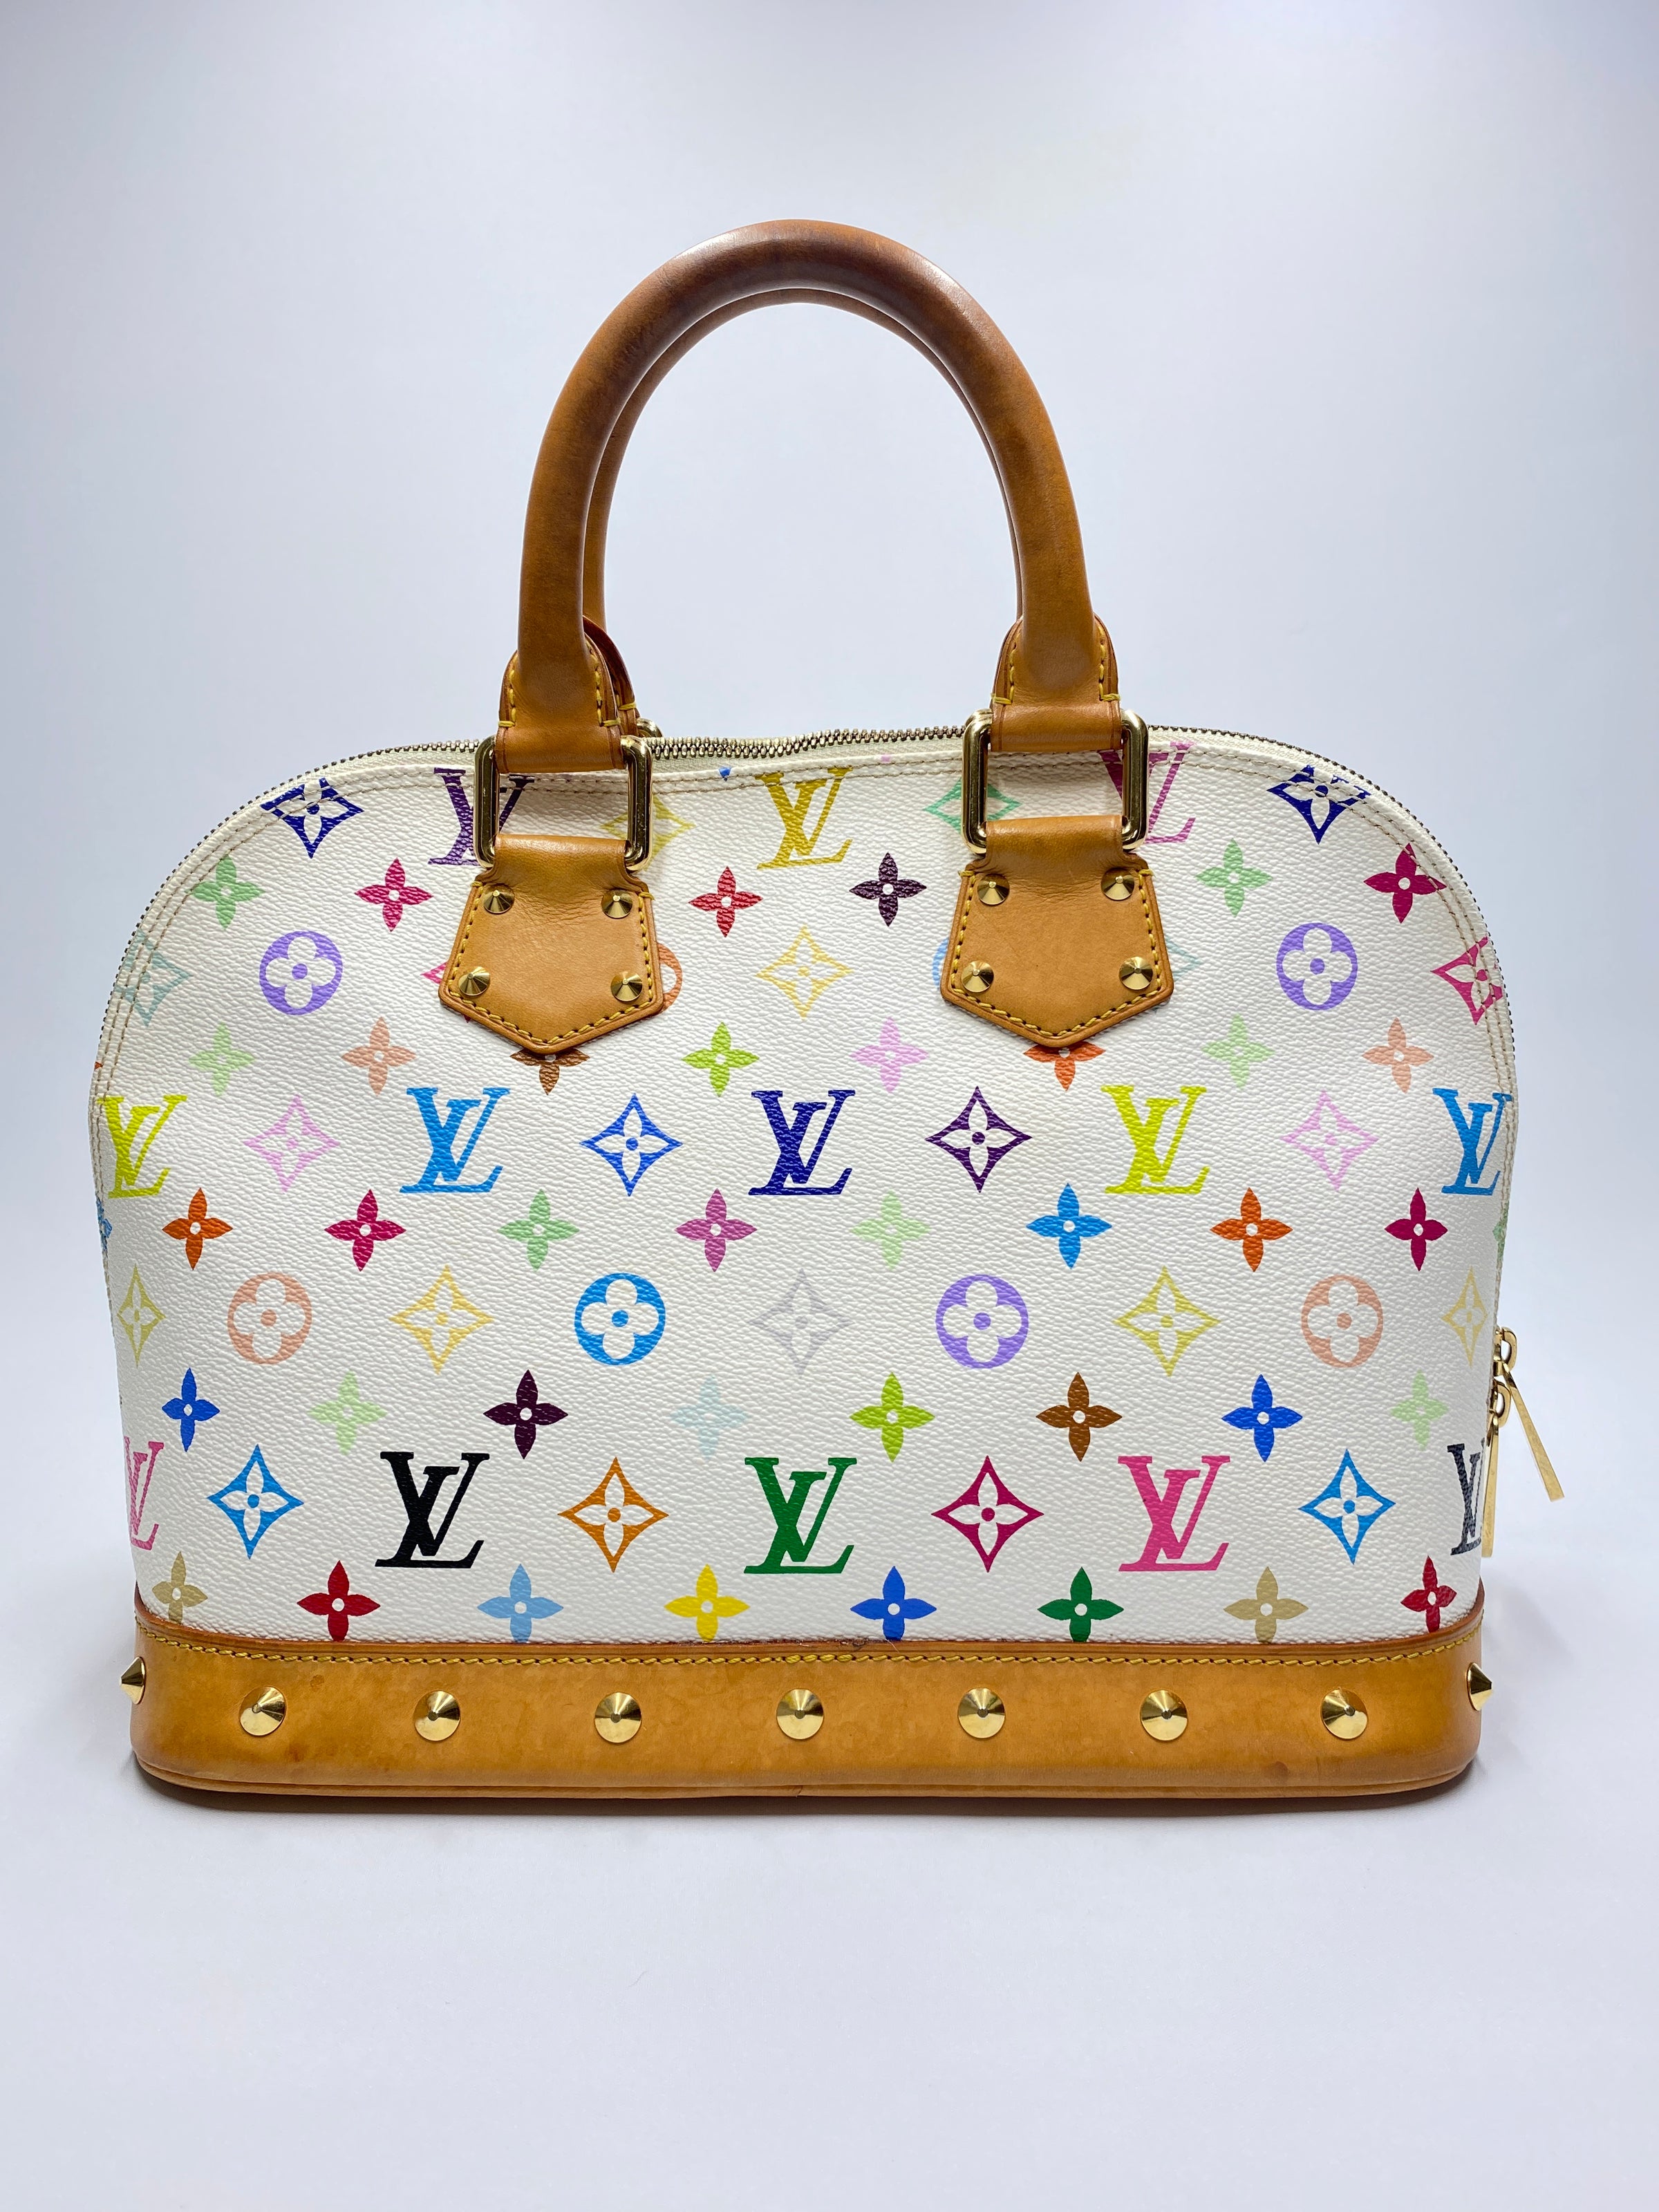 LV Alma PM Bag With All White Outfit